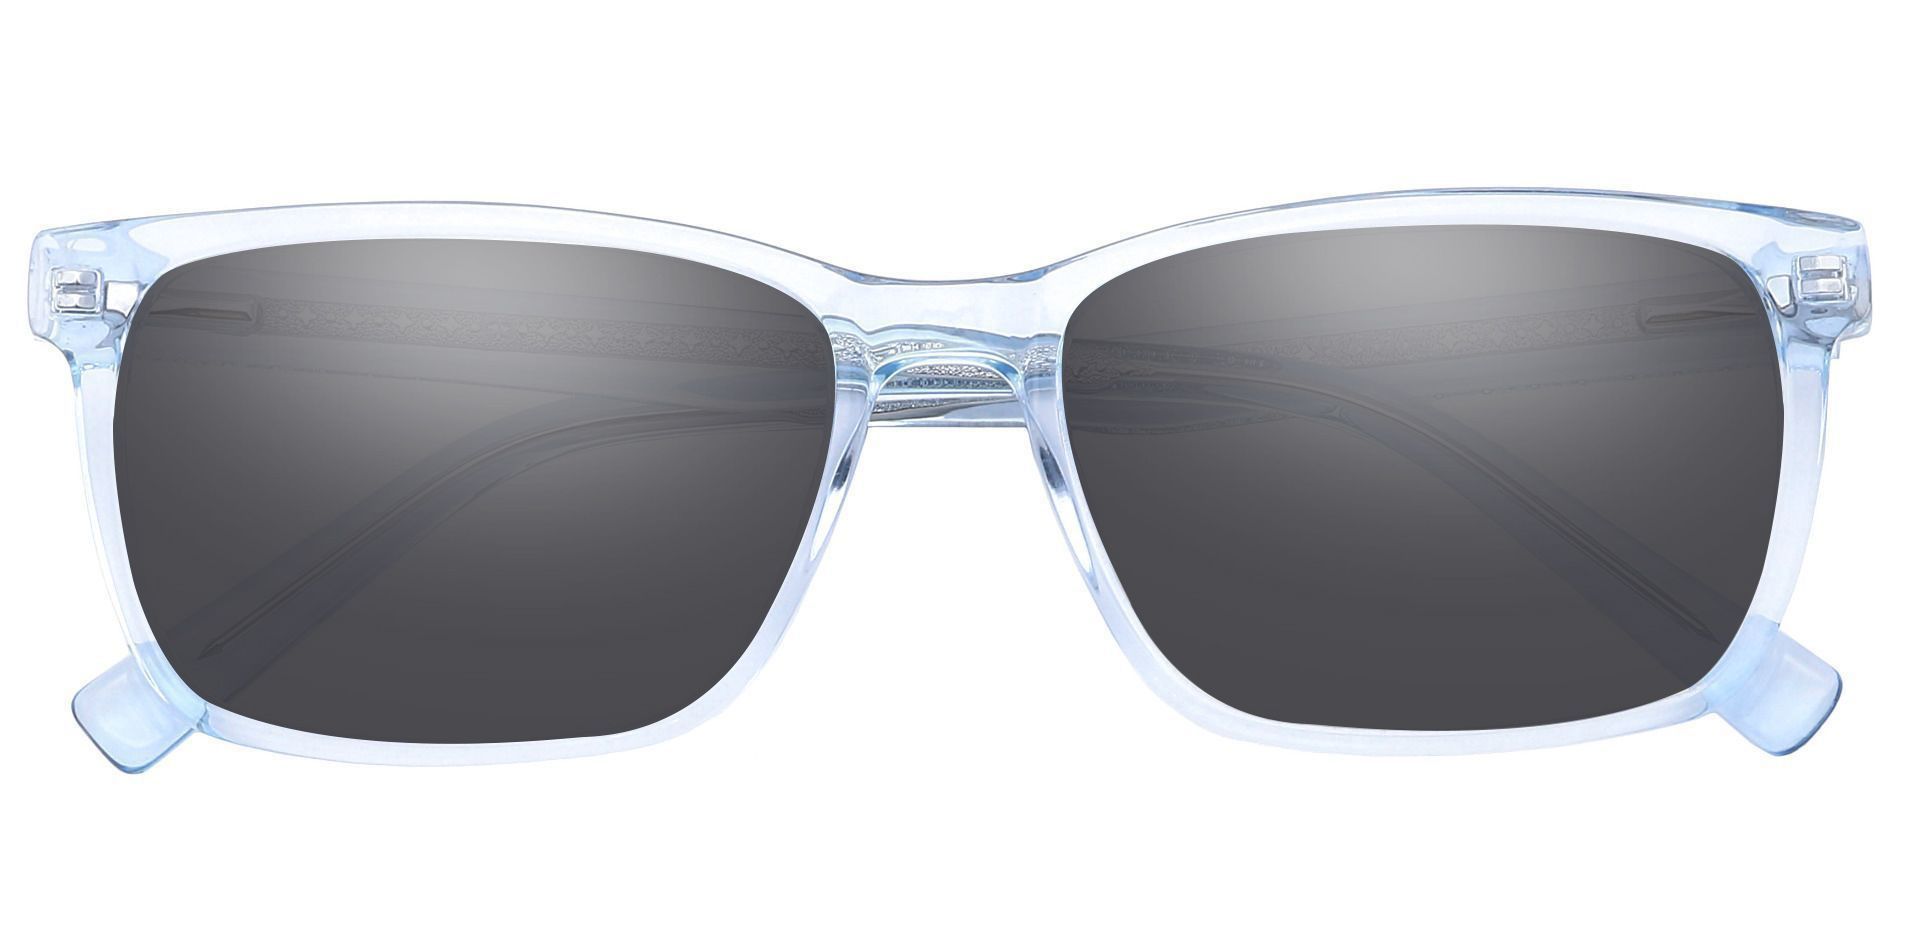 Galaxy Rectangle Lined Bifocal Sunglasses - Blue Frame With Gray Lenses